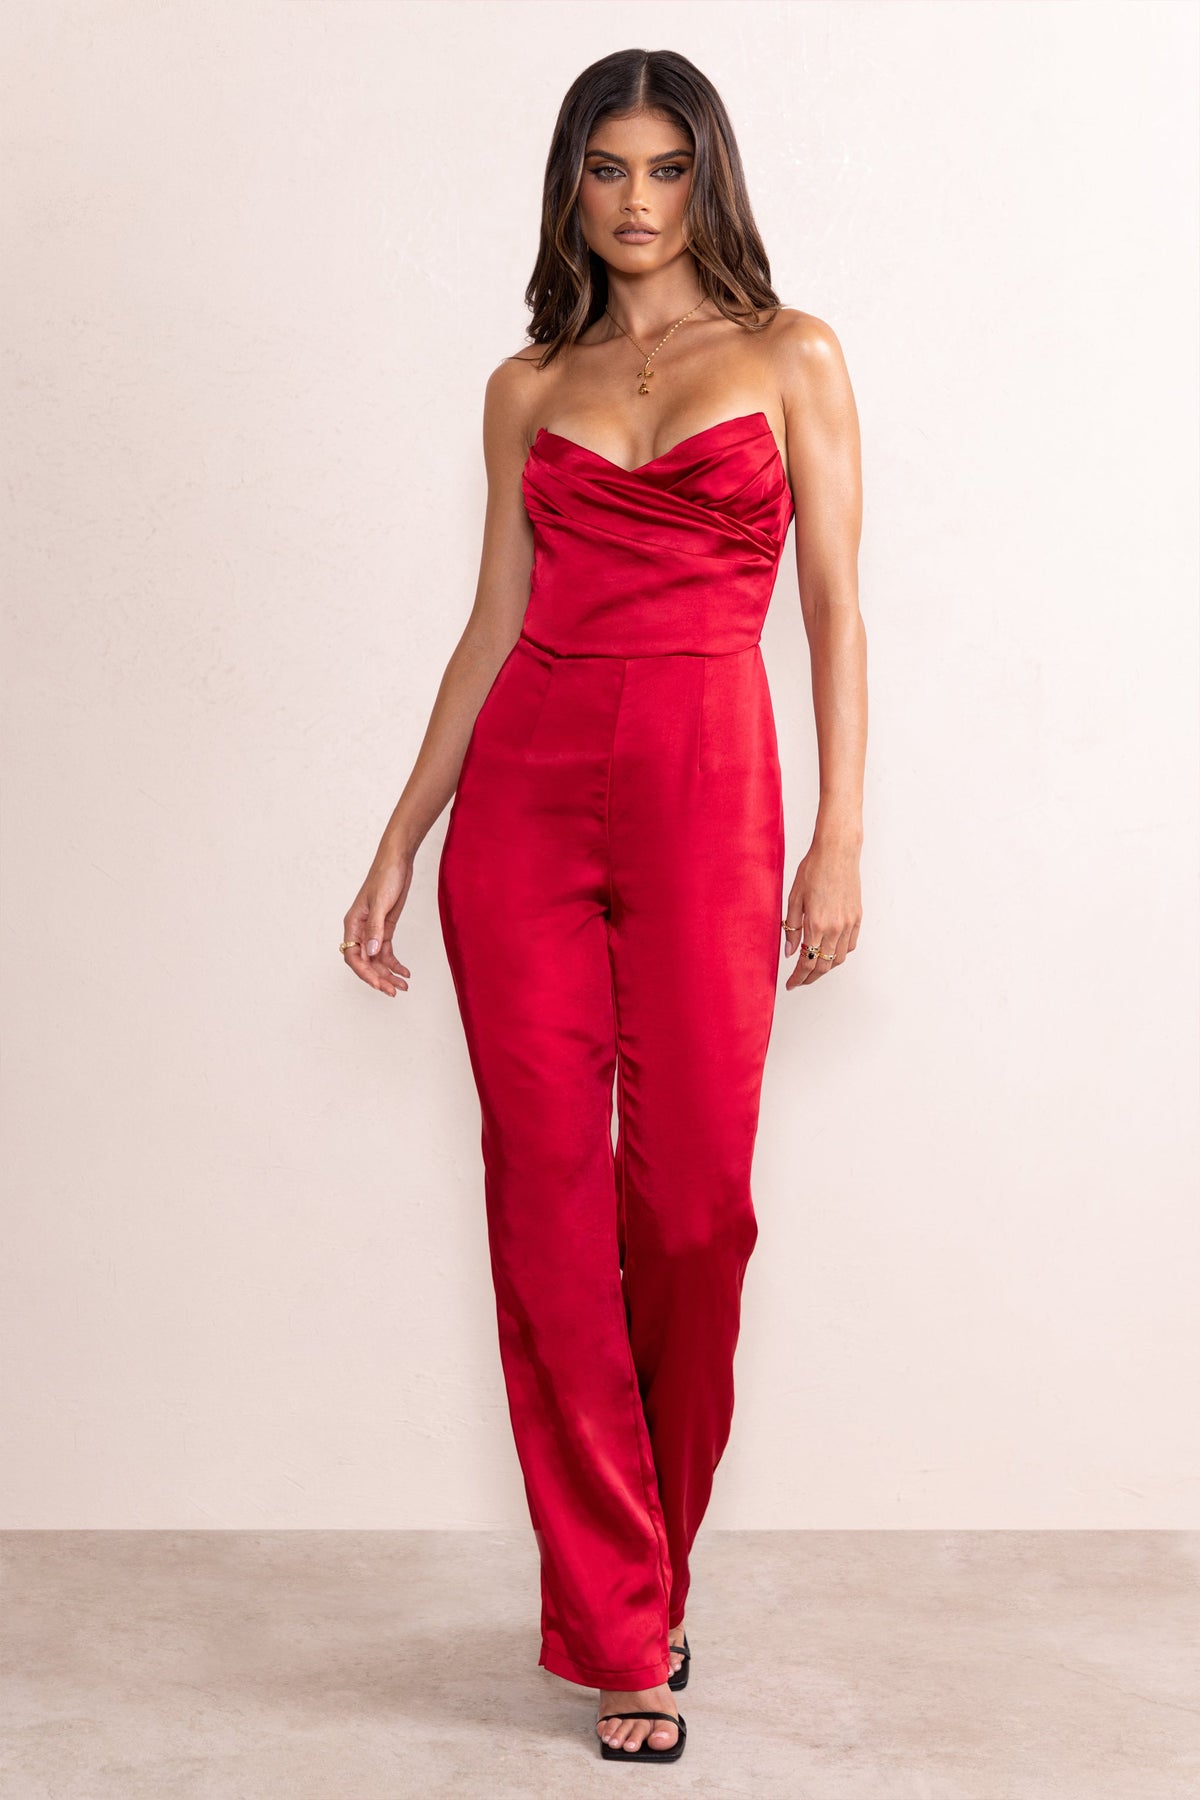 Missguided satin bralet in red